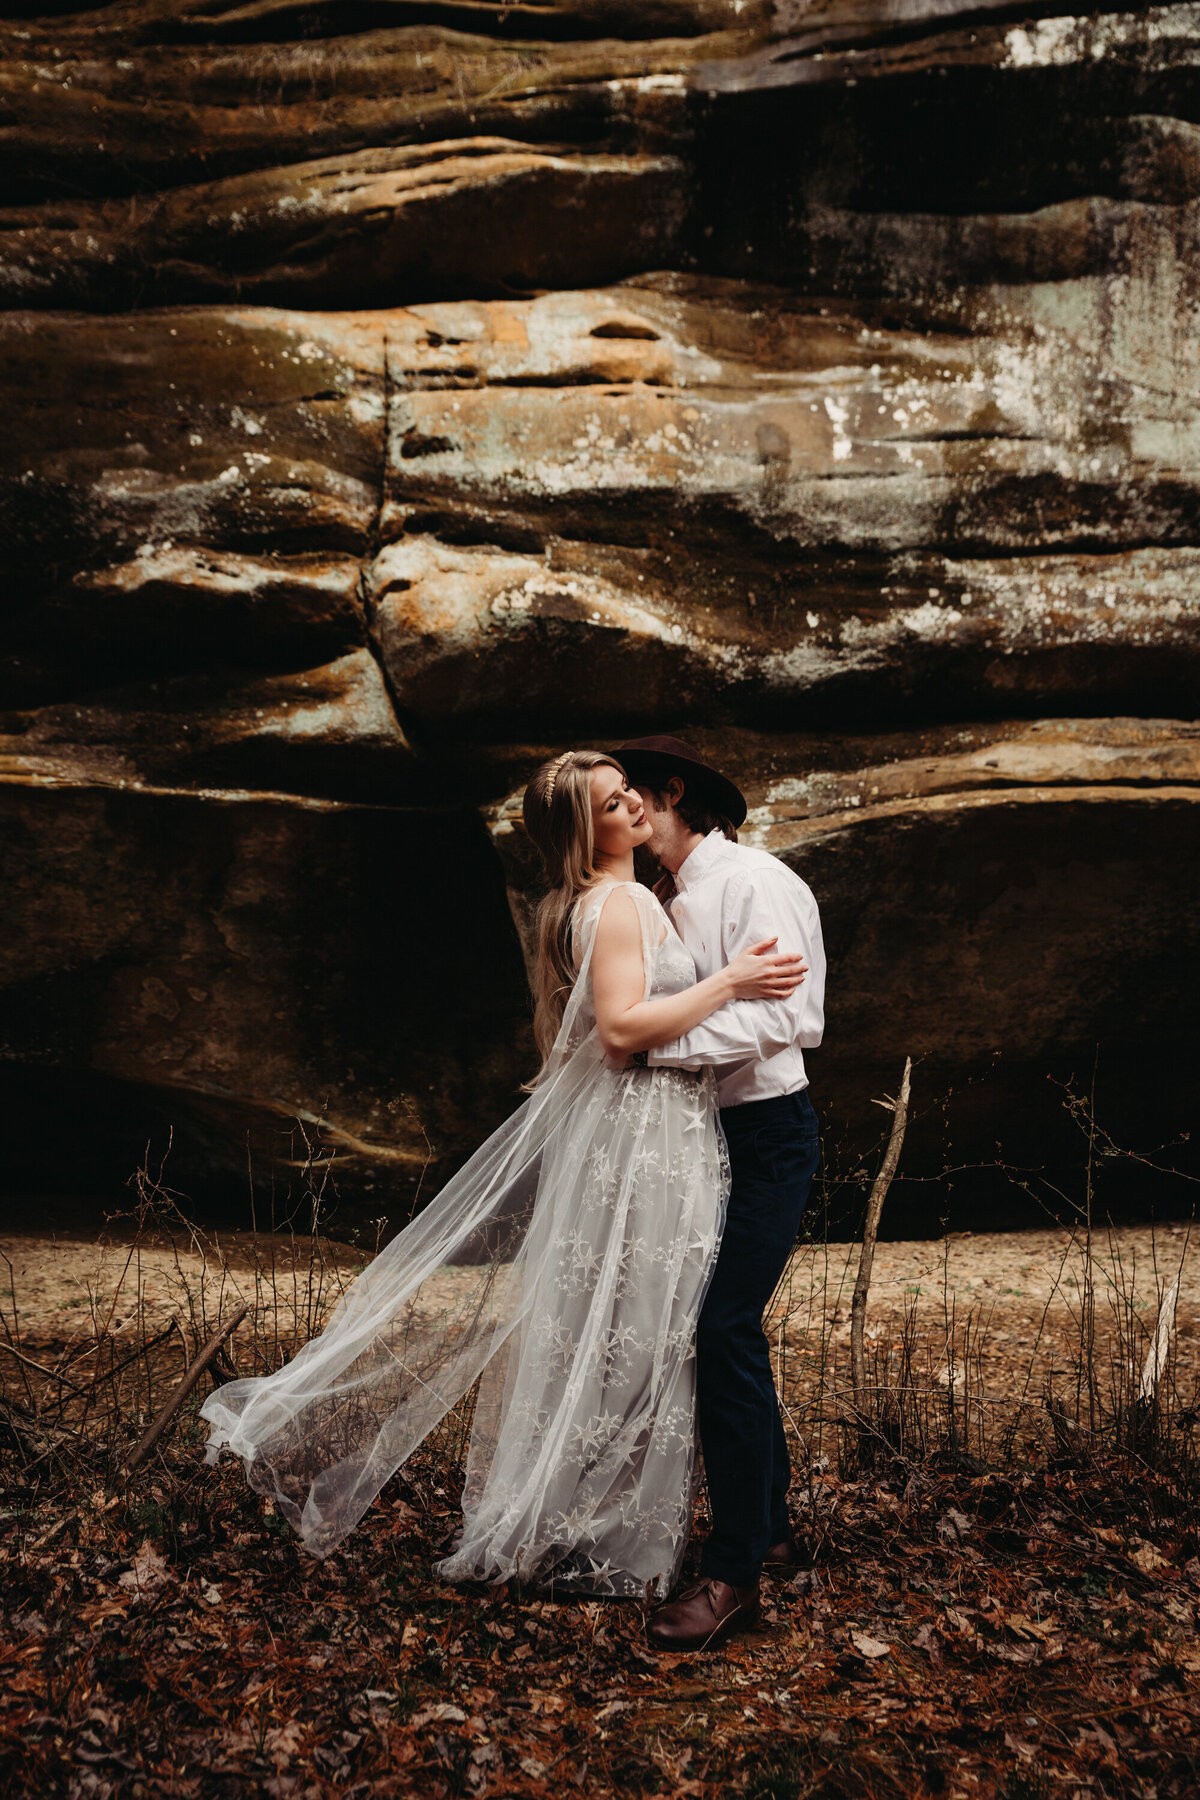 Celestial style elopement in Hocking HIlls cave.